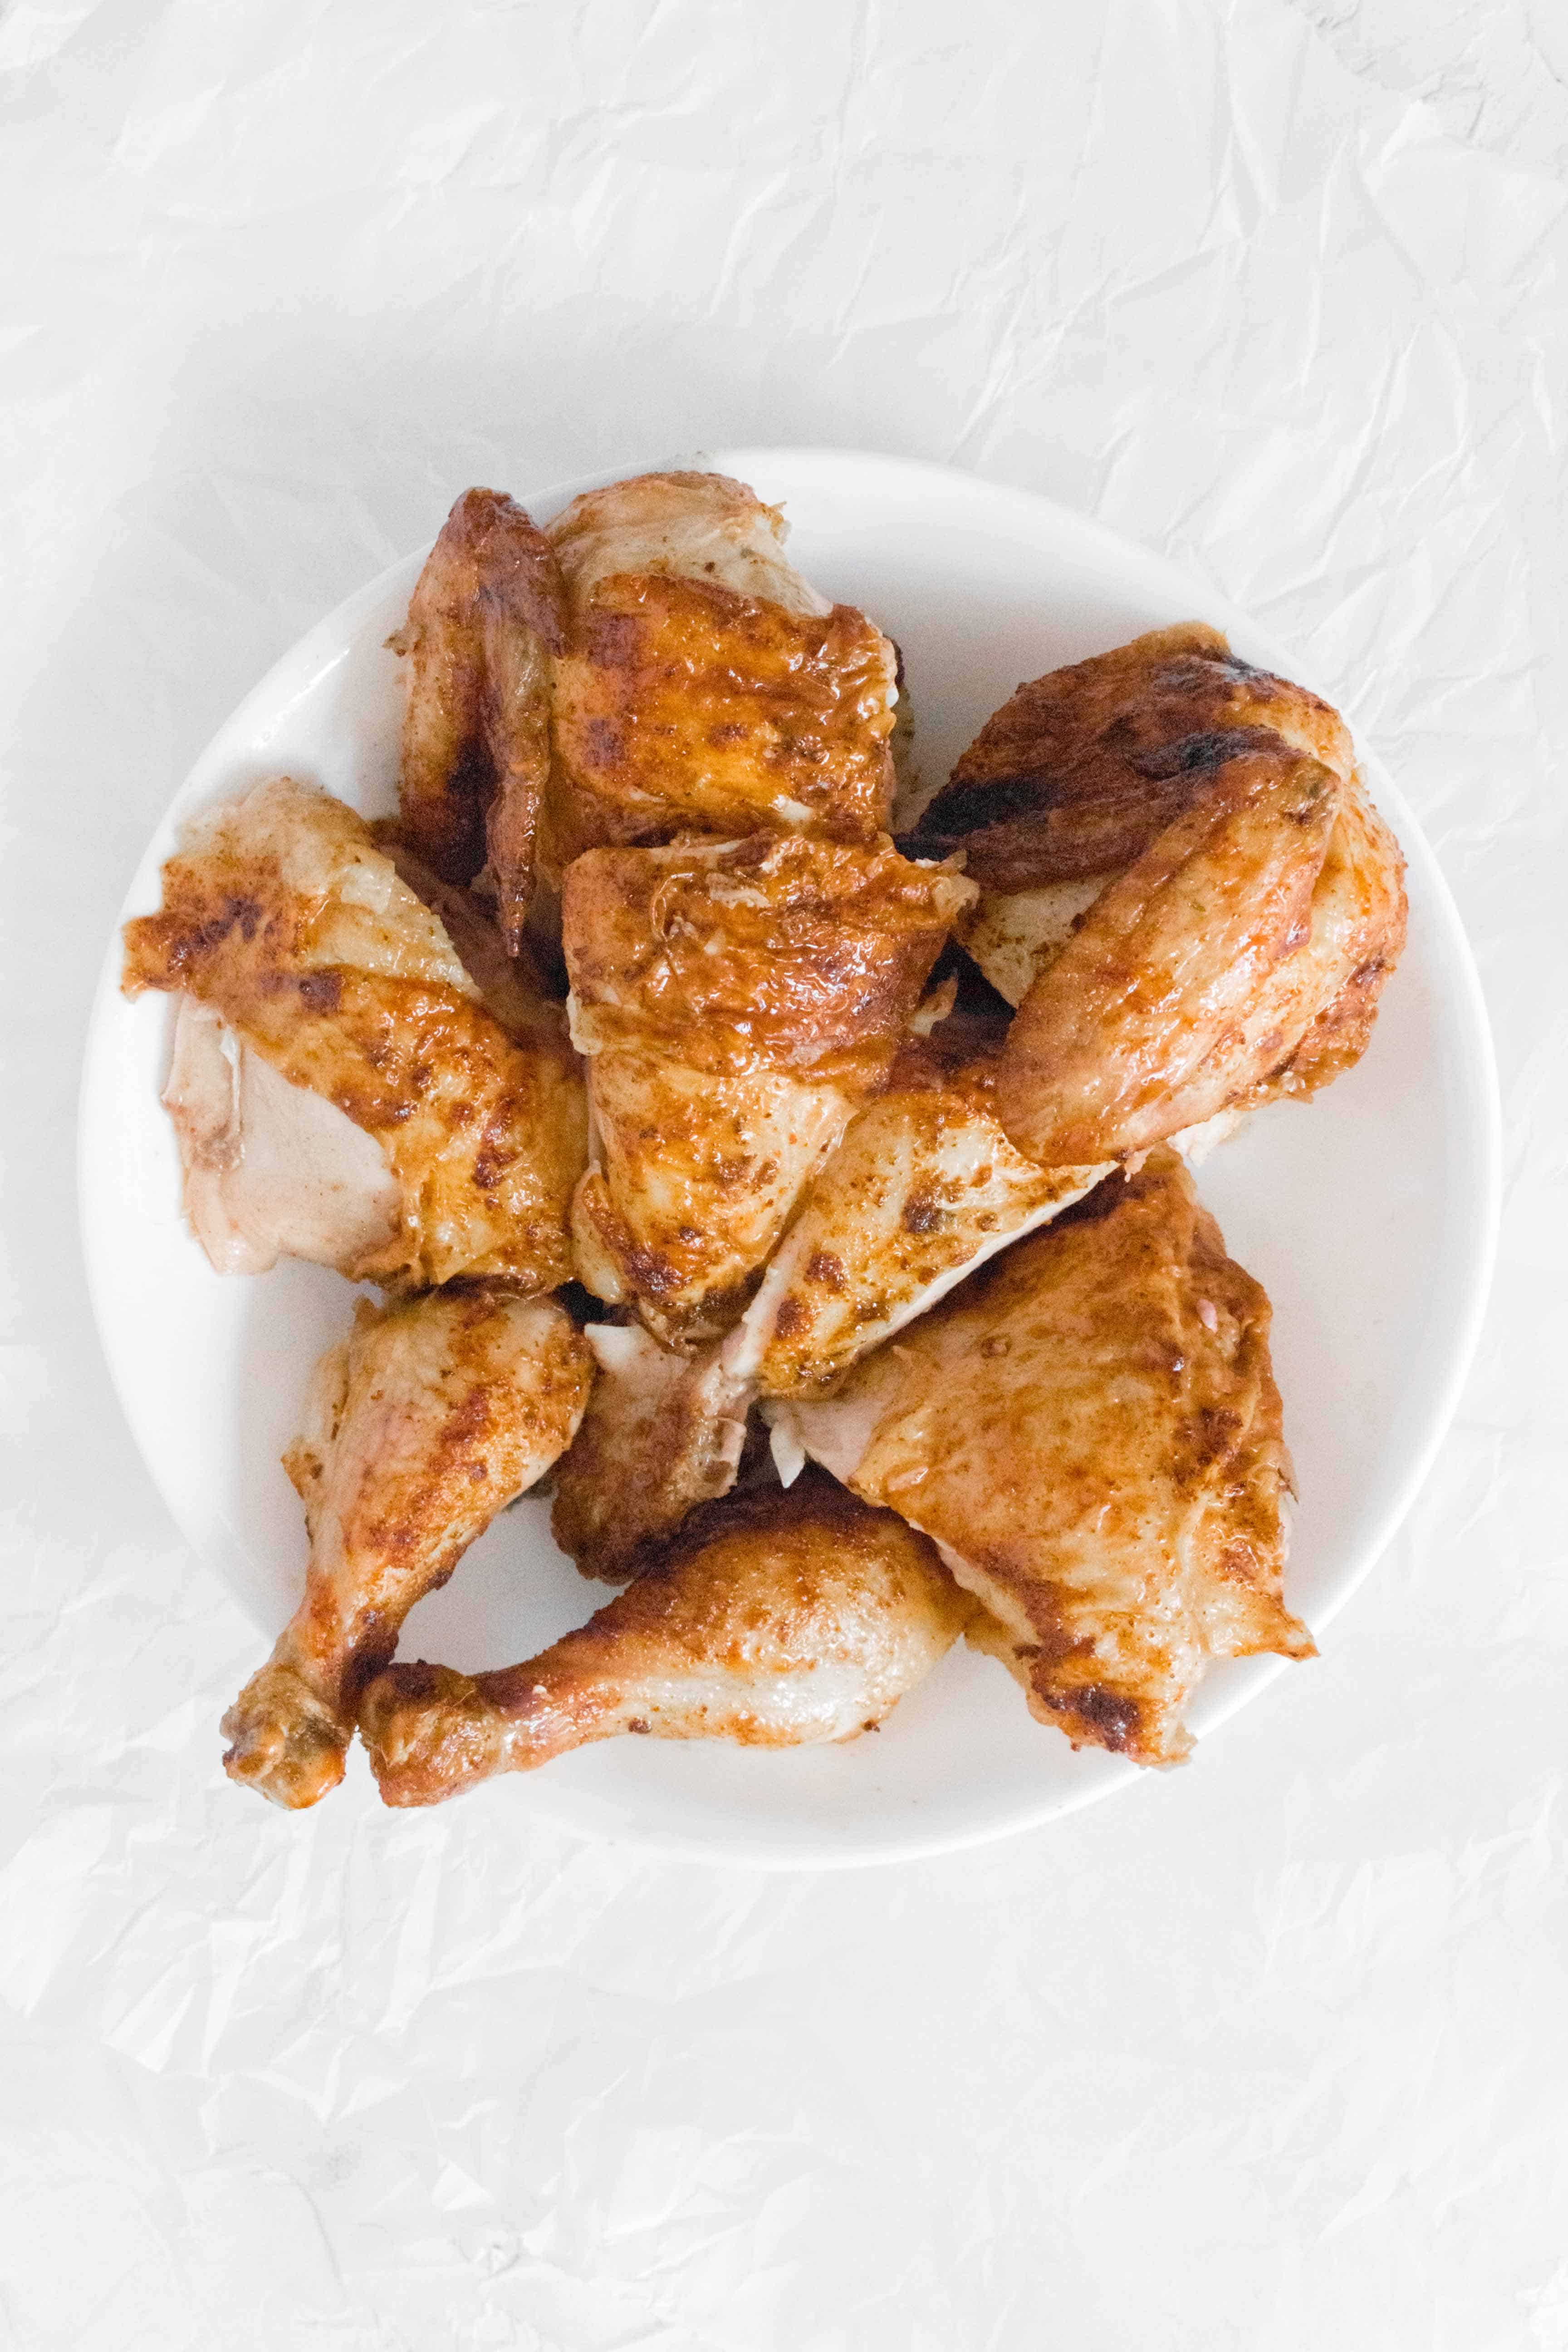 Cooking an Air Fryer Whole Chicken